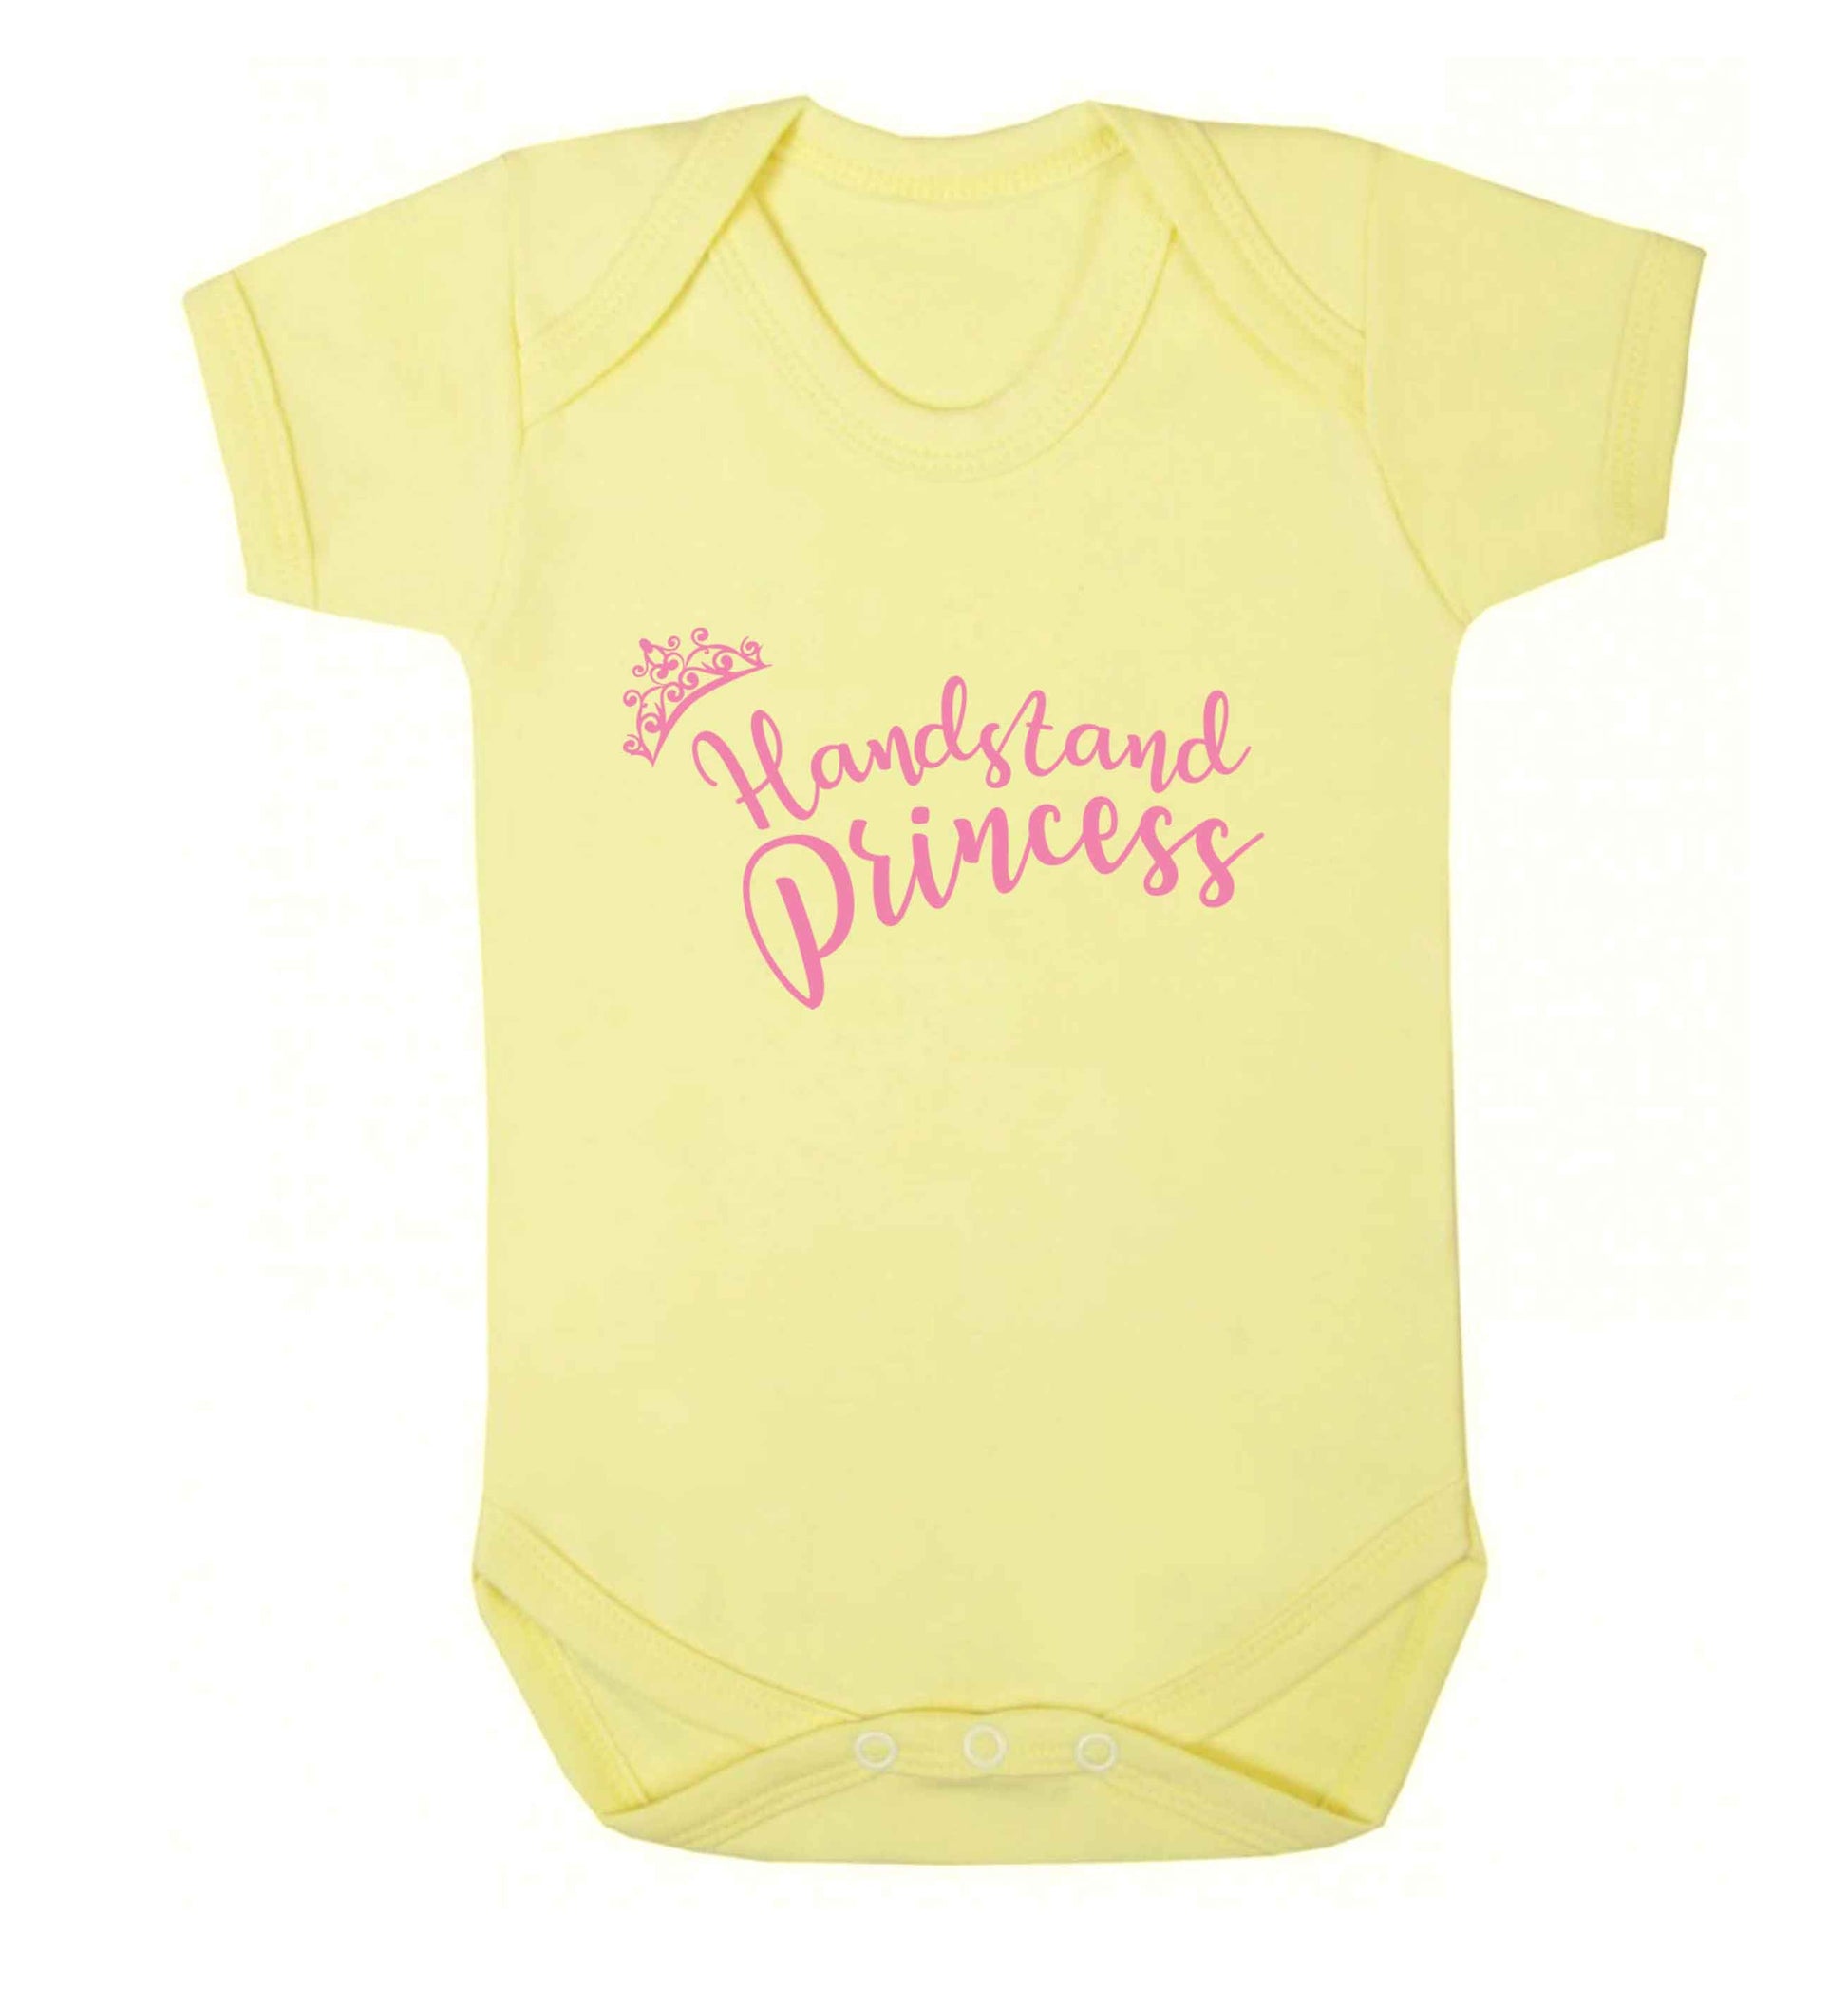 Handstand princess Baby Vest pale yellow 18-24 months